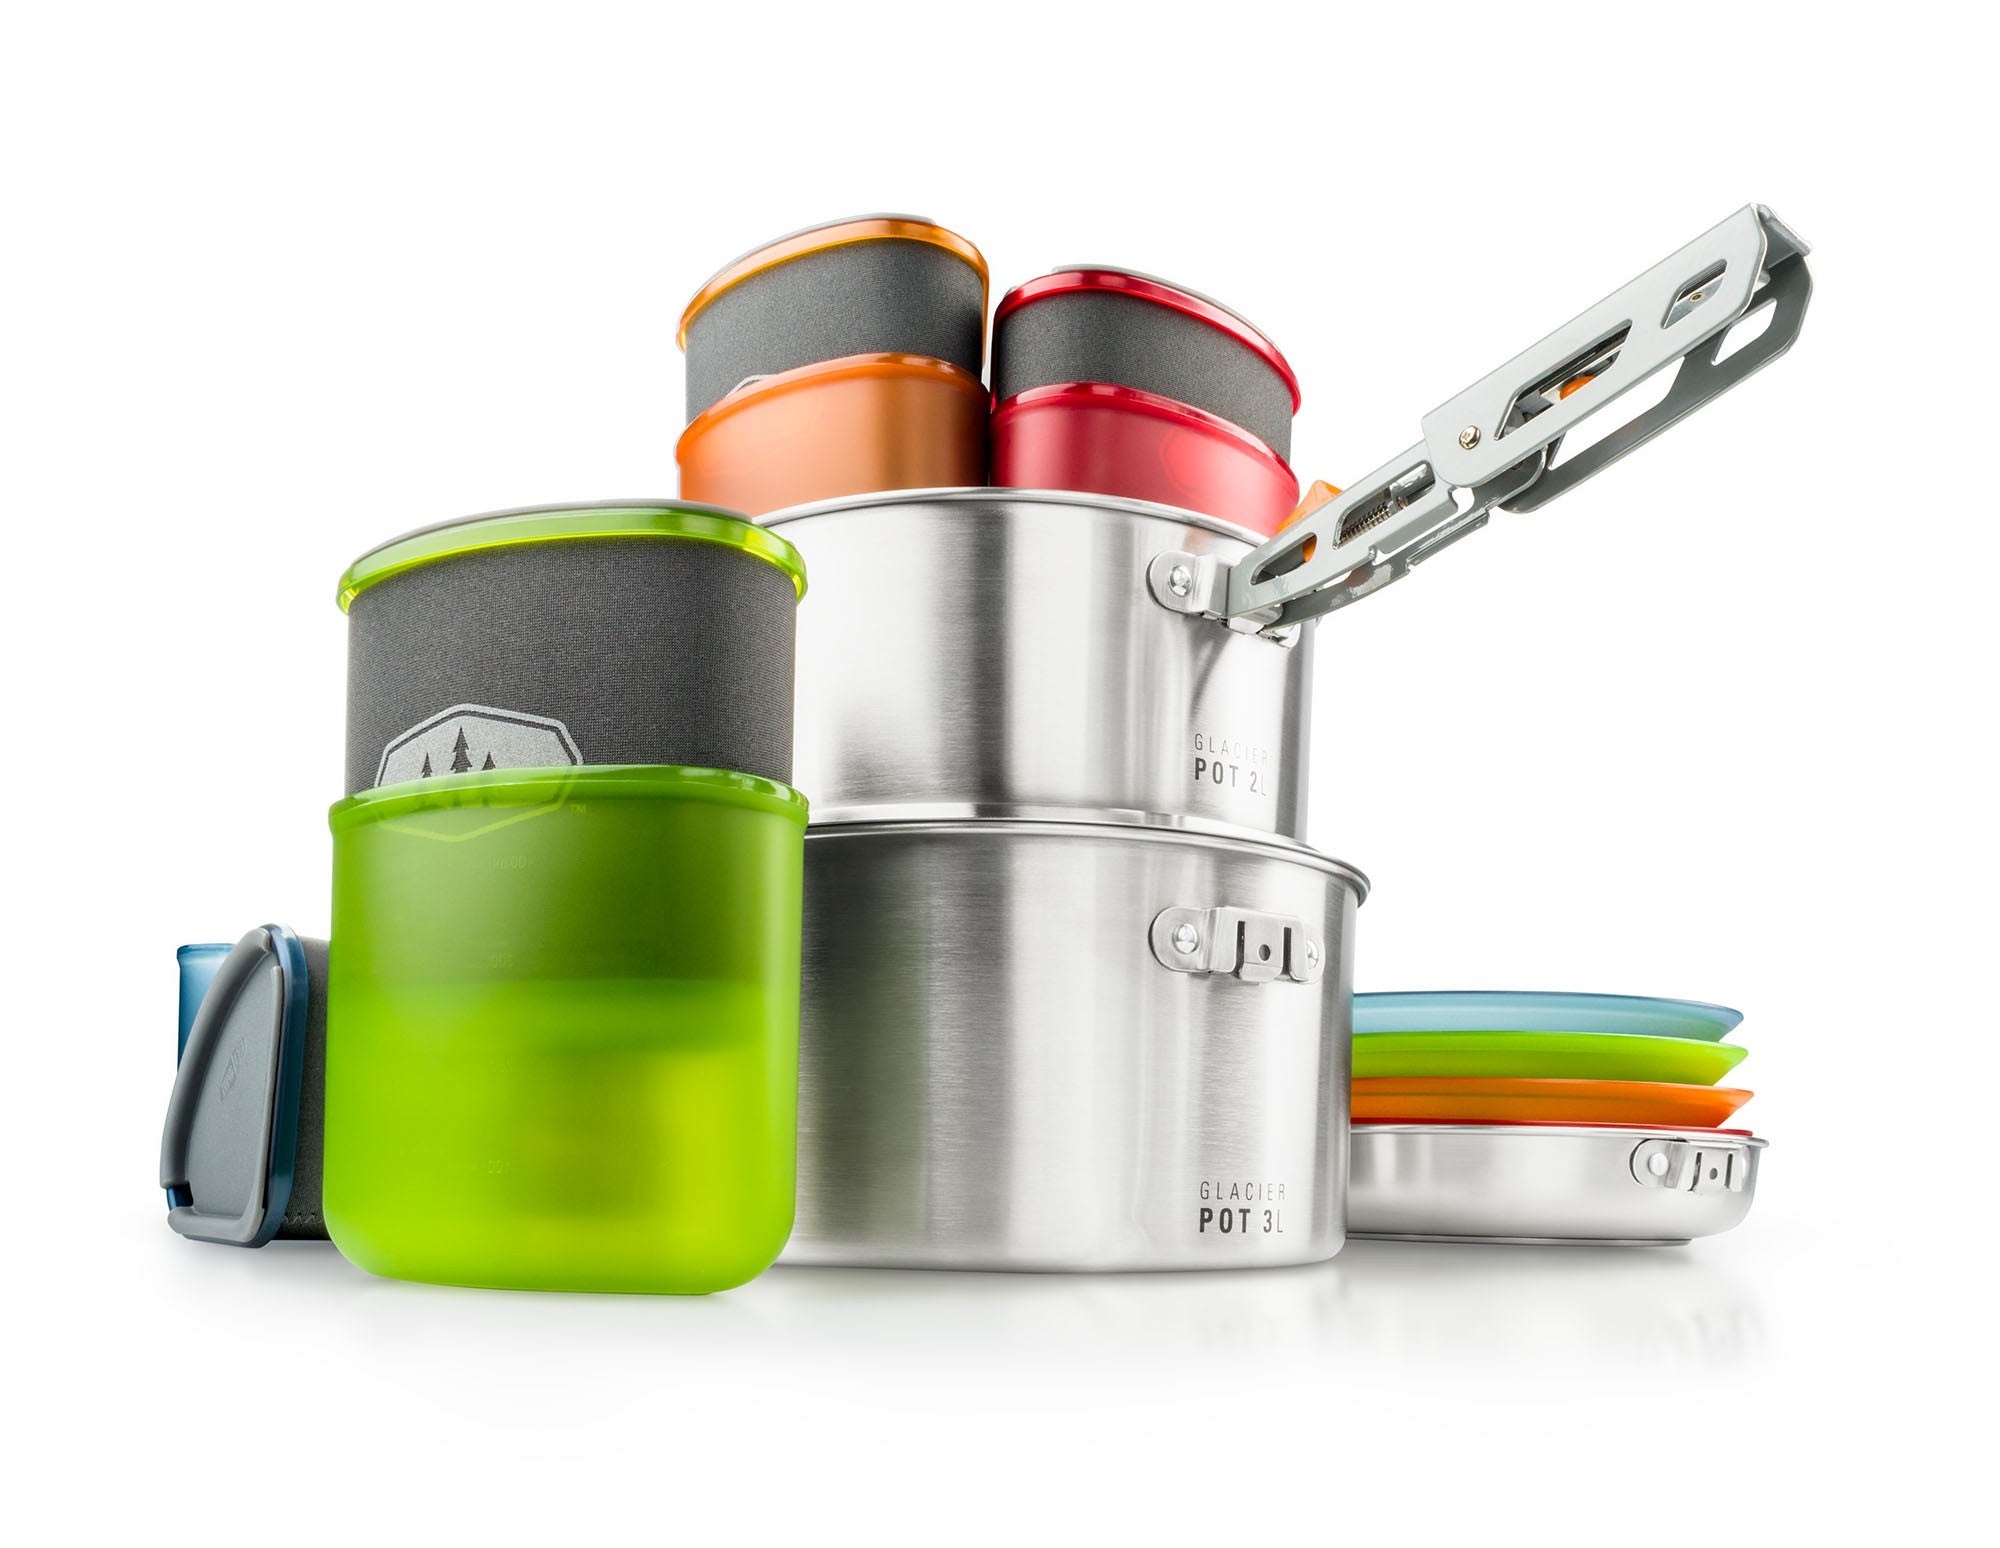 Cool Gear 2-Pack American Designed, Stainless Steel, Dishwasher Safe